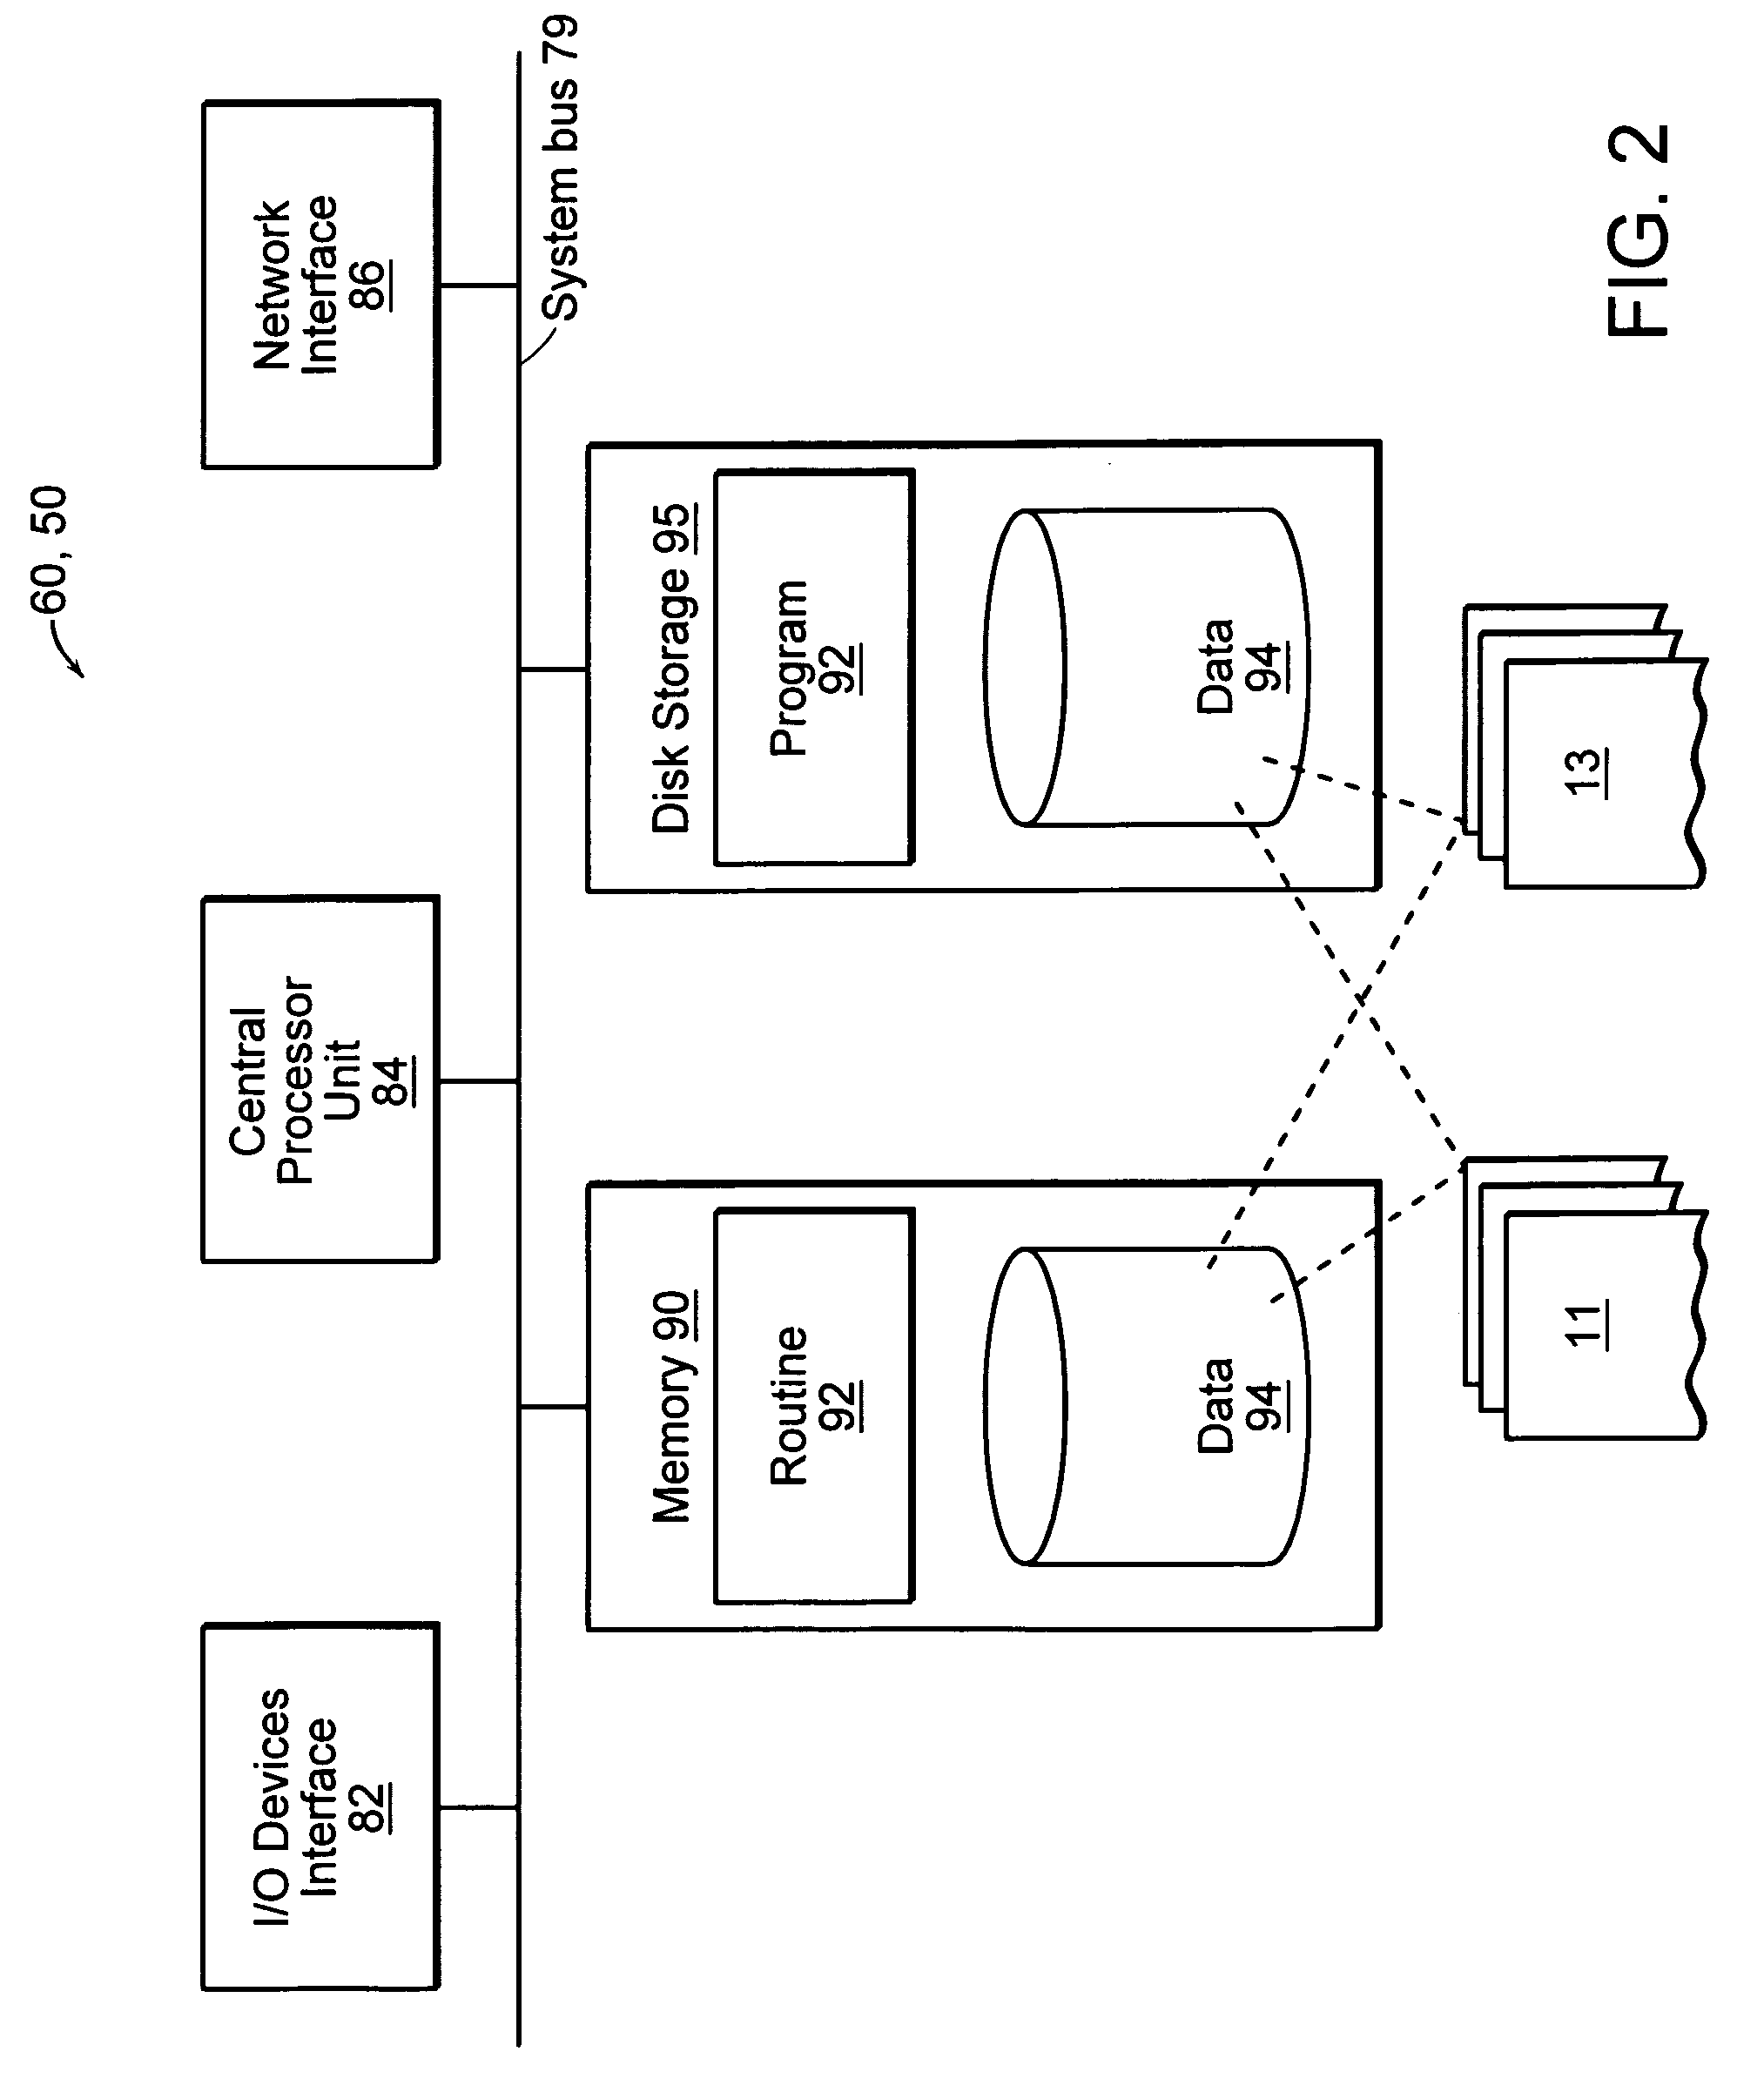 Method and apparatus for customizing lesson plans